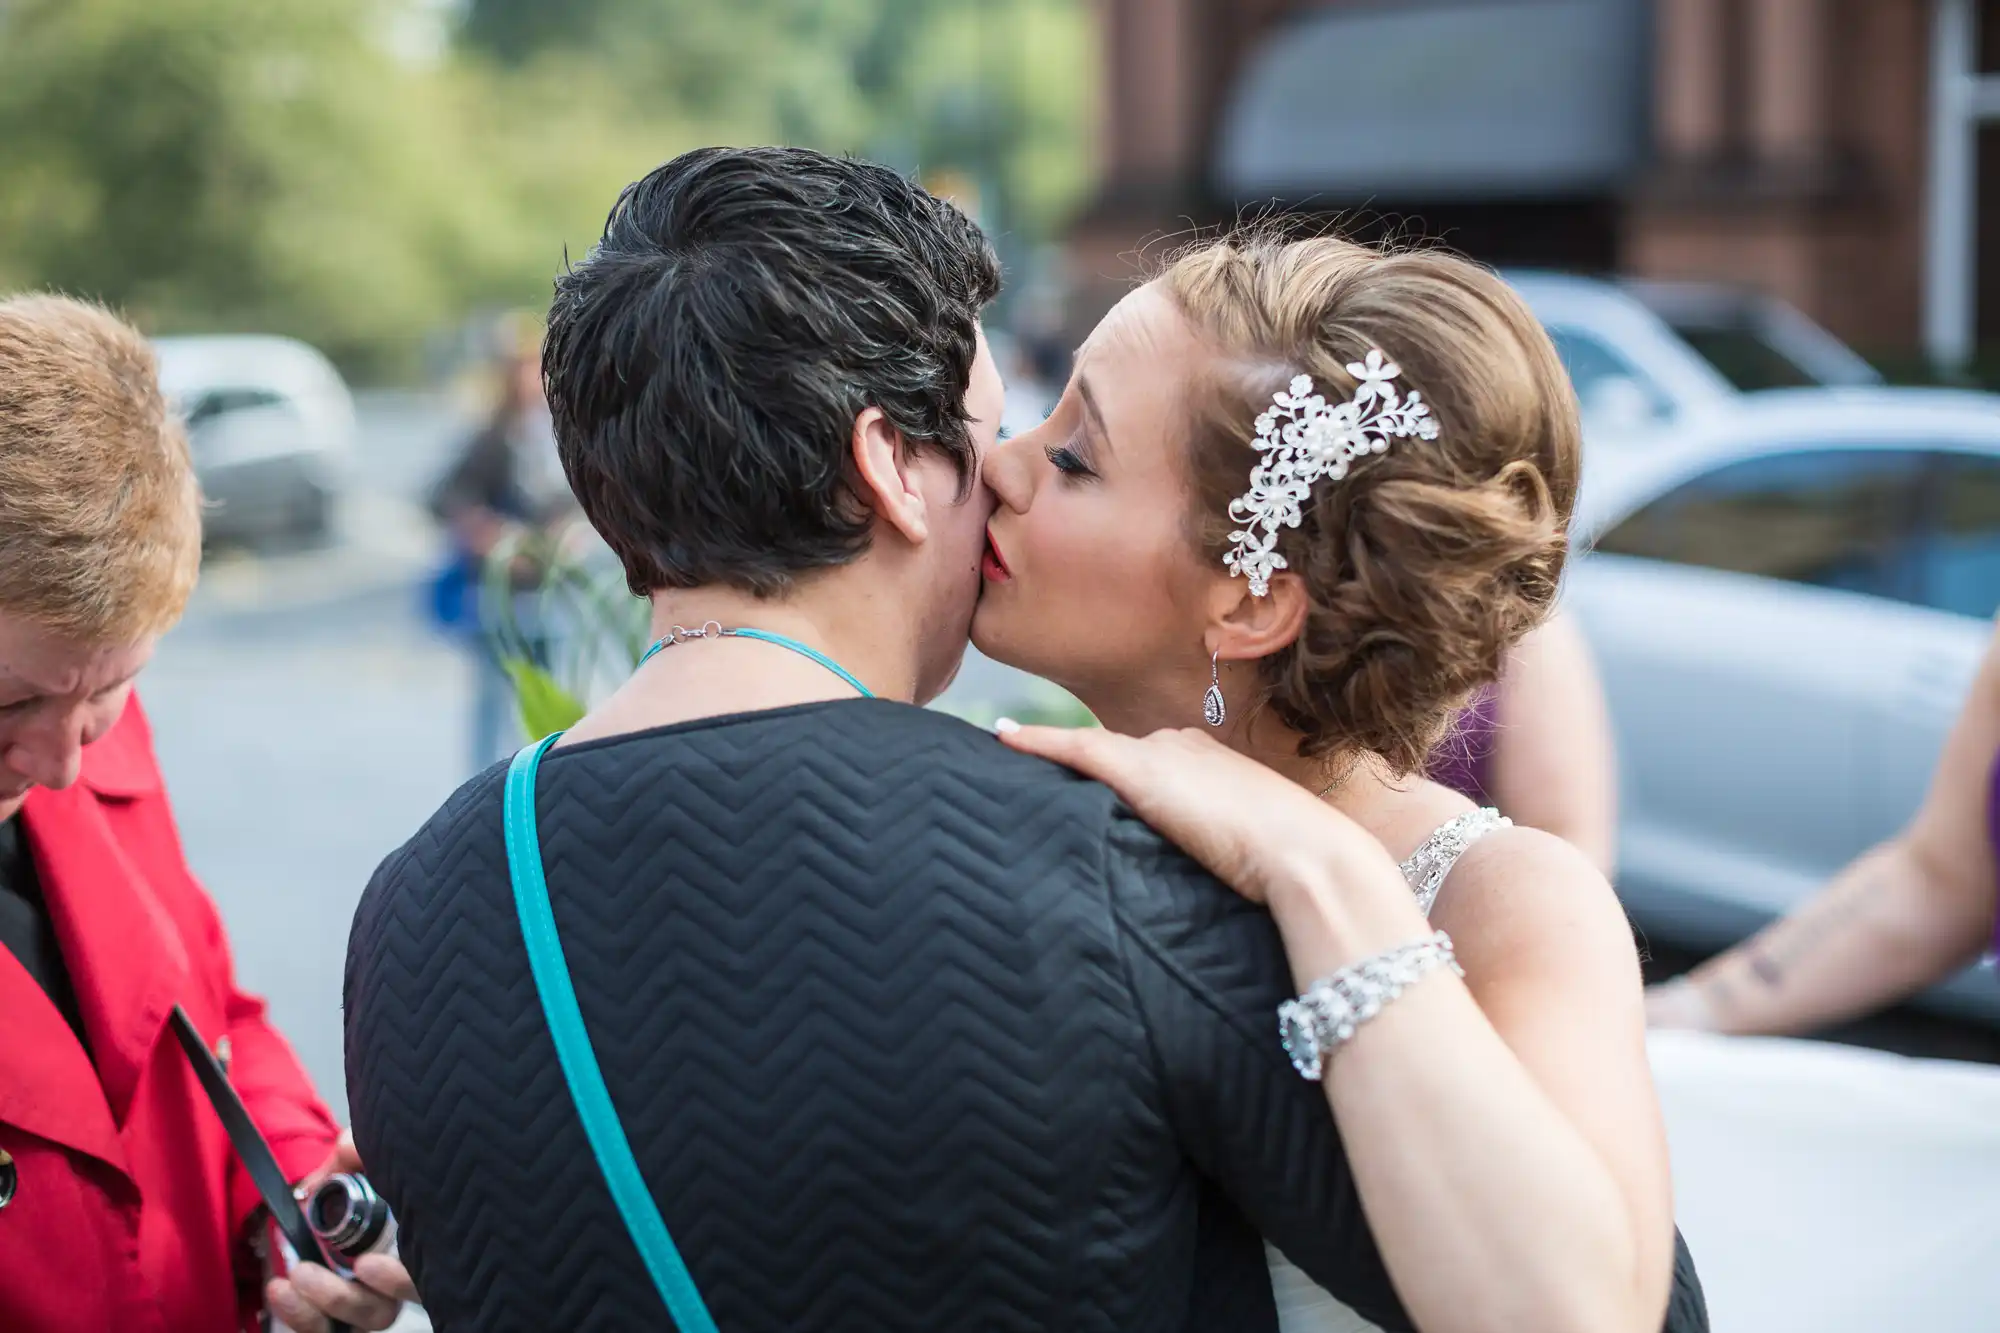 A bride and groom kissing, the bride with a decorative hairpiece, on a street with a woman and cars in the background.